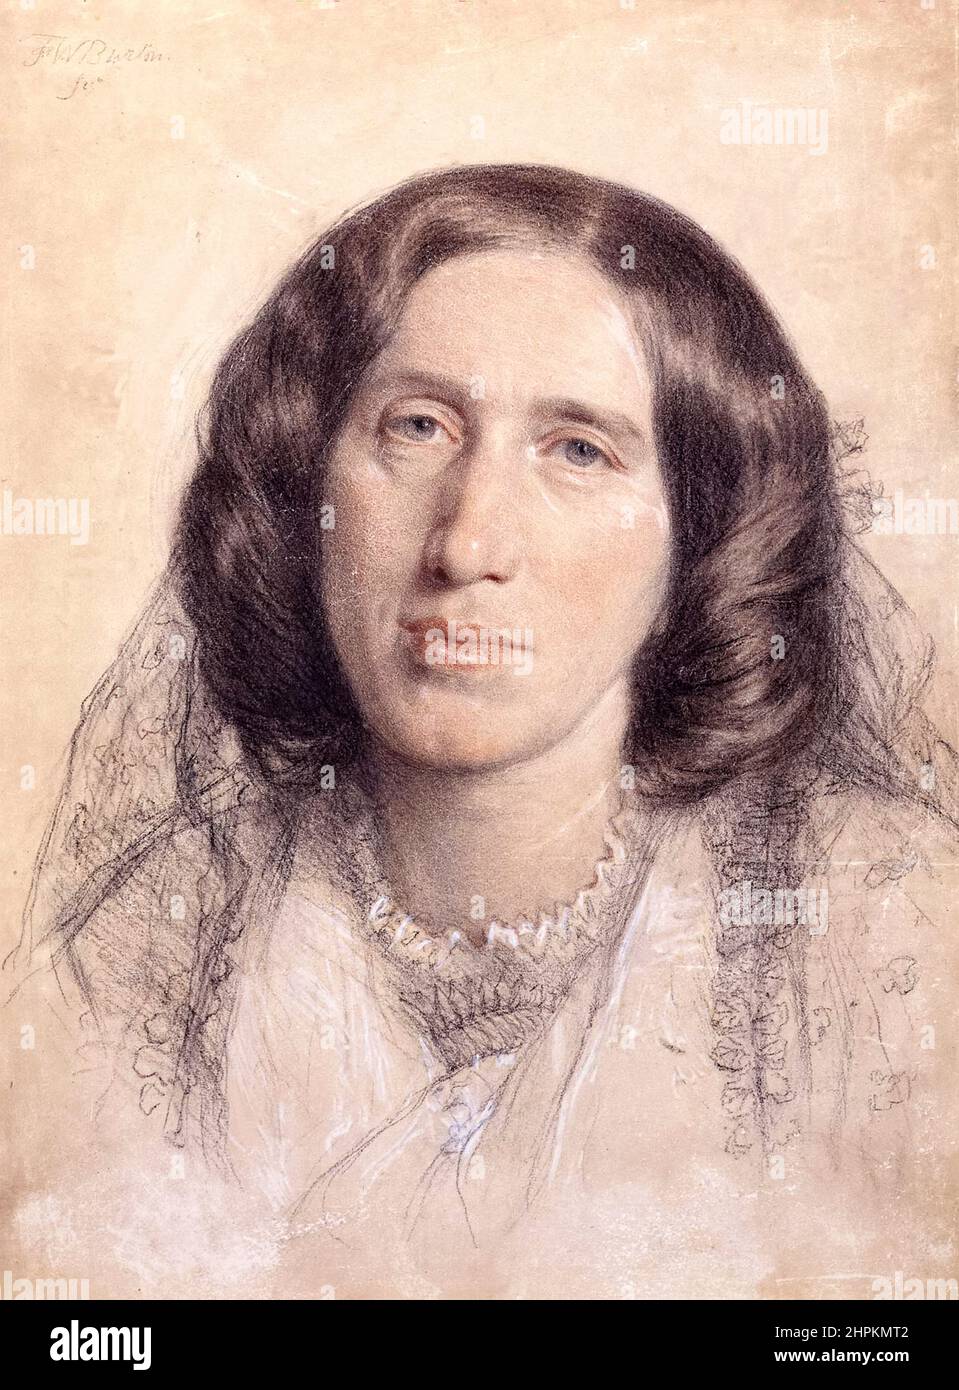 George Eliot (pen name of Mary Ann Evans) (1819-1880) English author of one of the great Victorian novels, Middlemarch, A Study of Provincial Life published in 1871 and 1872. Chalk portrait by Frederic William Burton (1816-1900) in 1865. Stock Photo